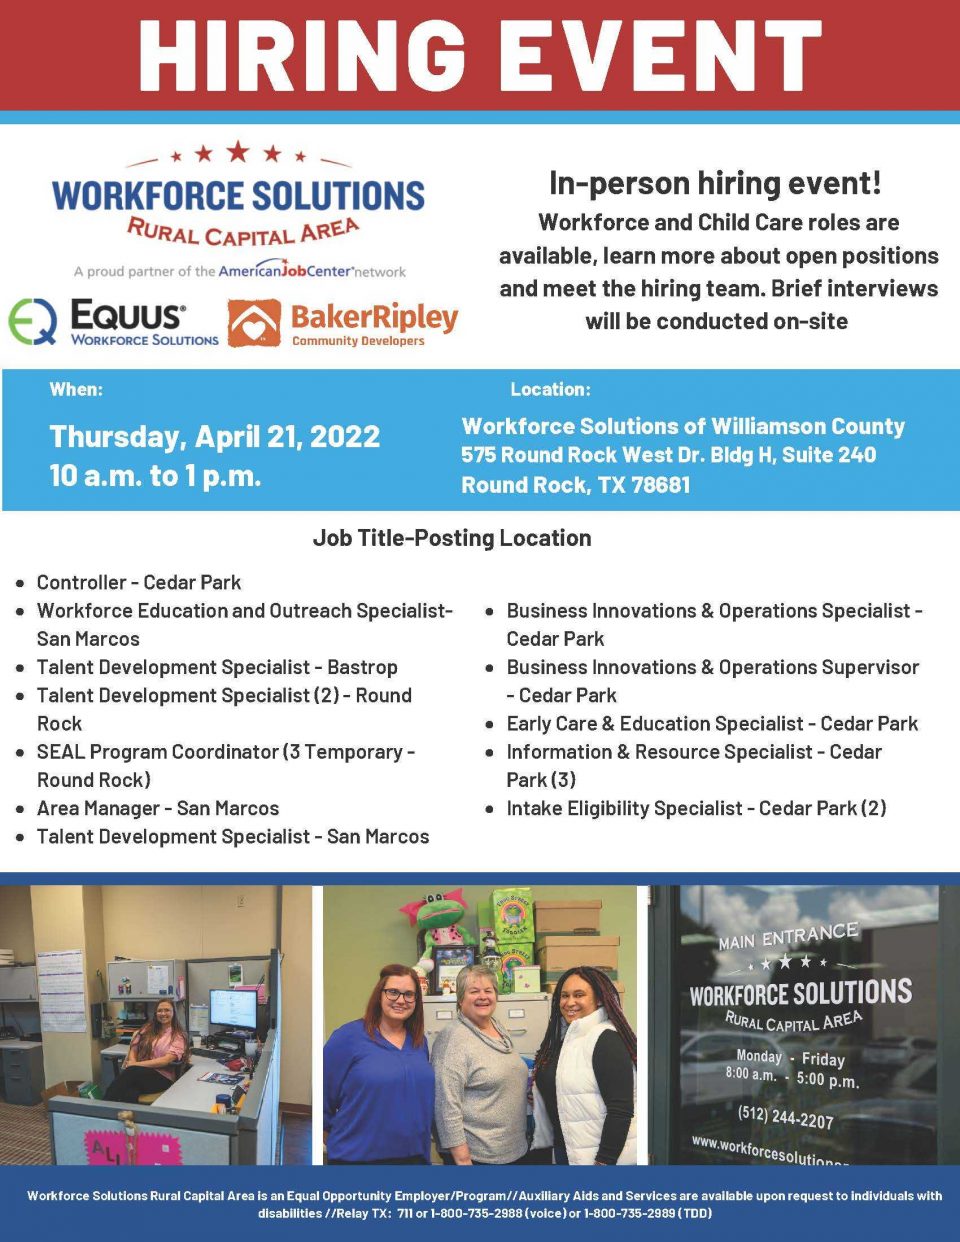 Don't Miss the Workforce Solutions Rural Capital Area Hiring Event on Thursday in Round Rock